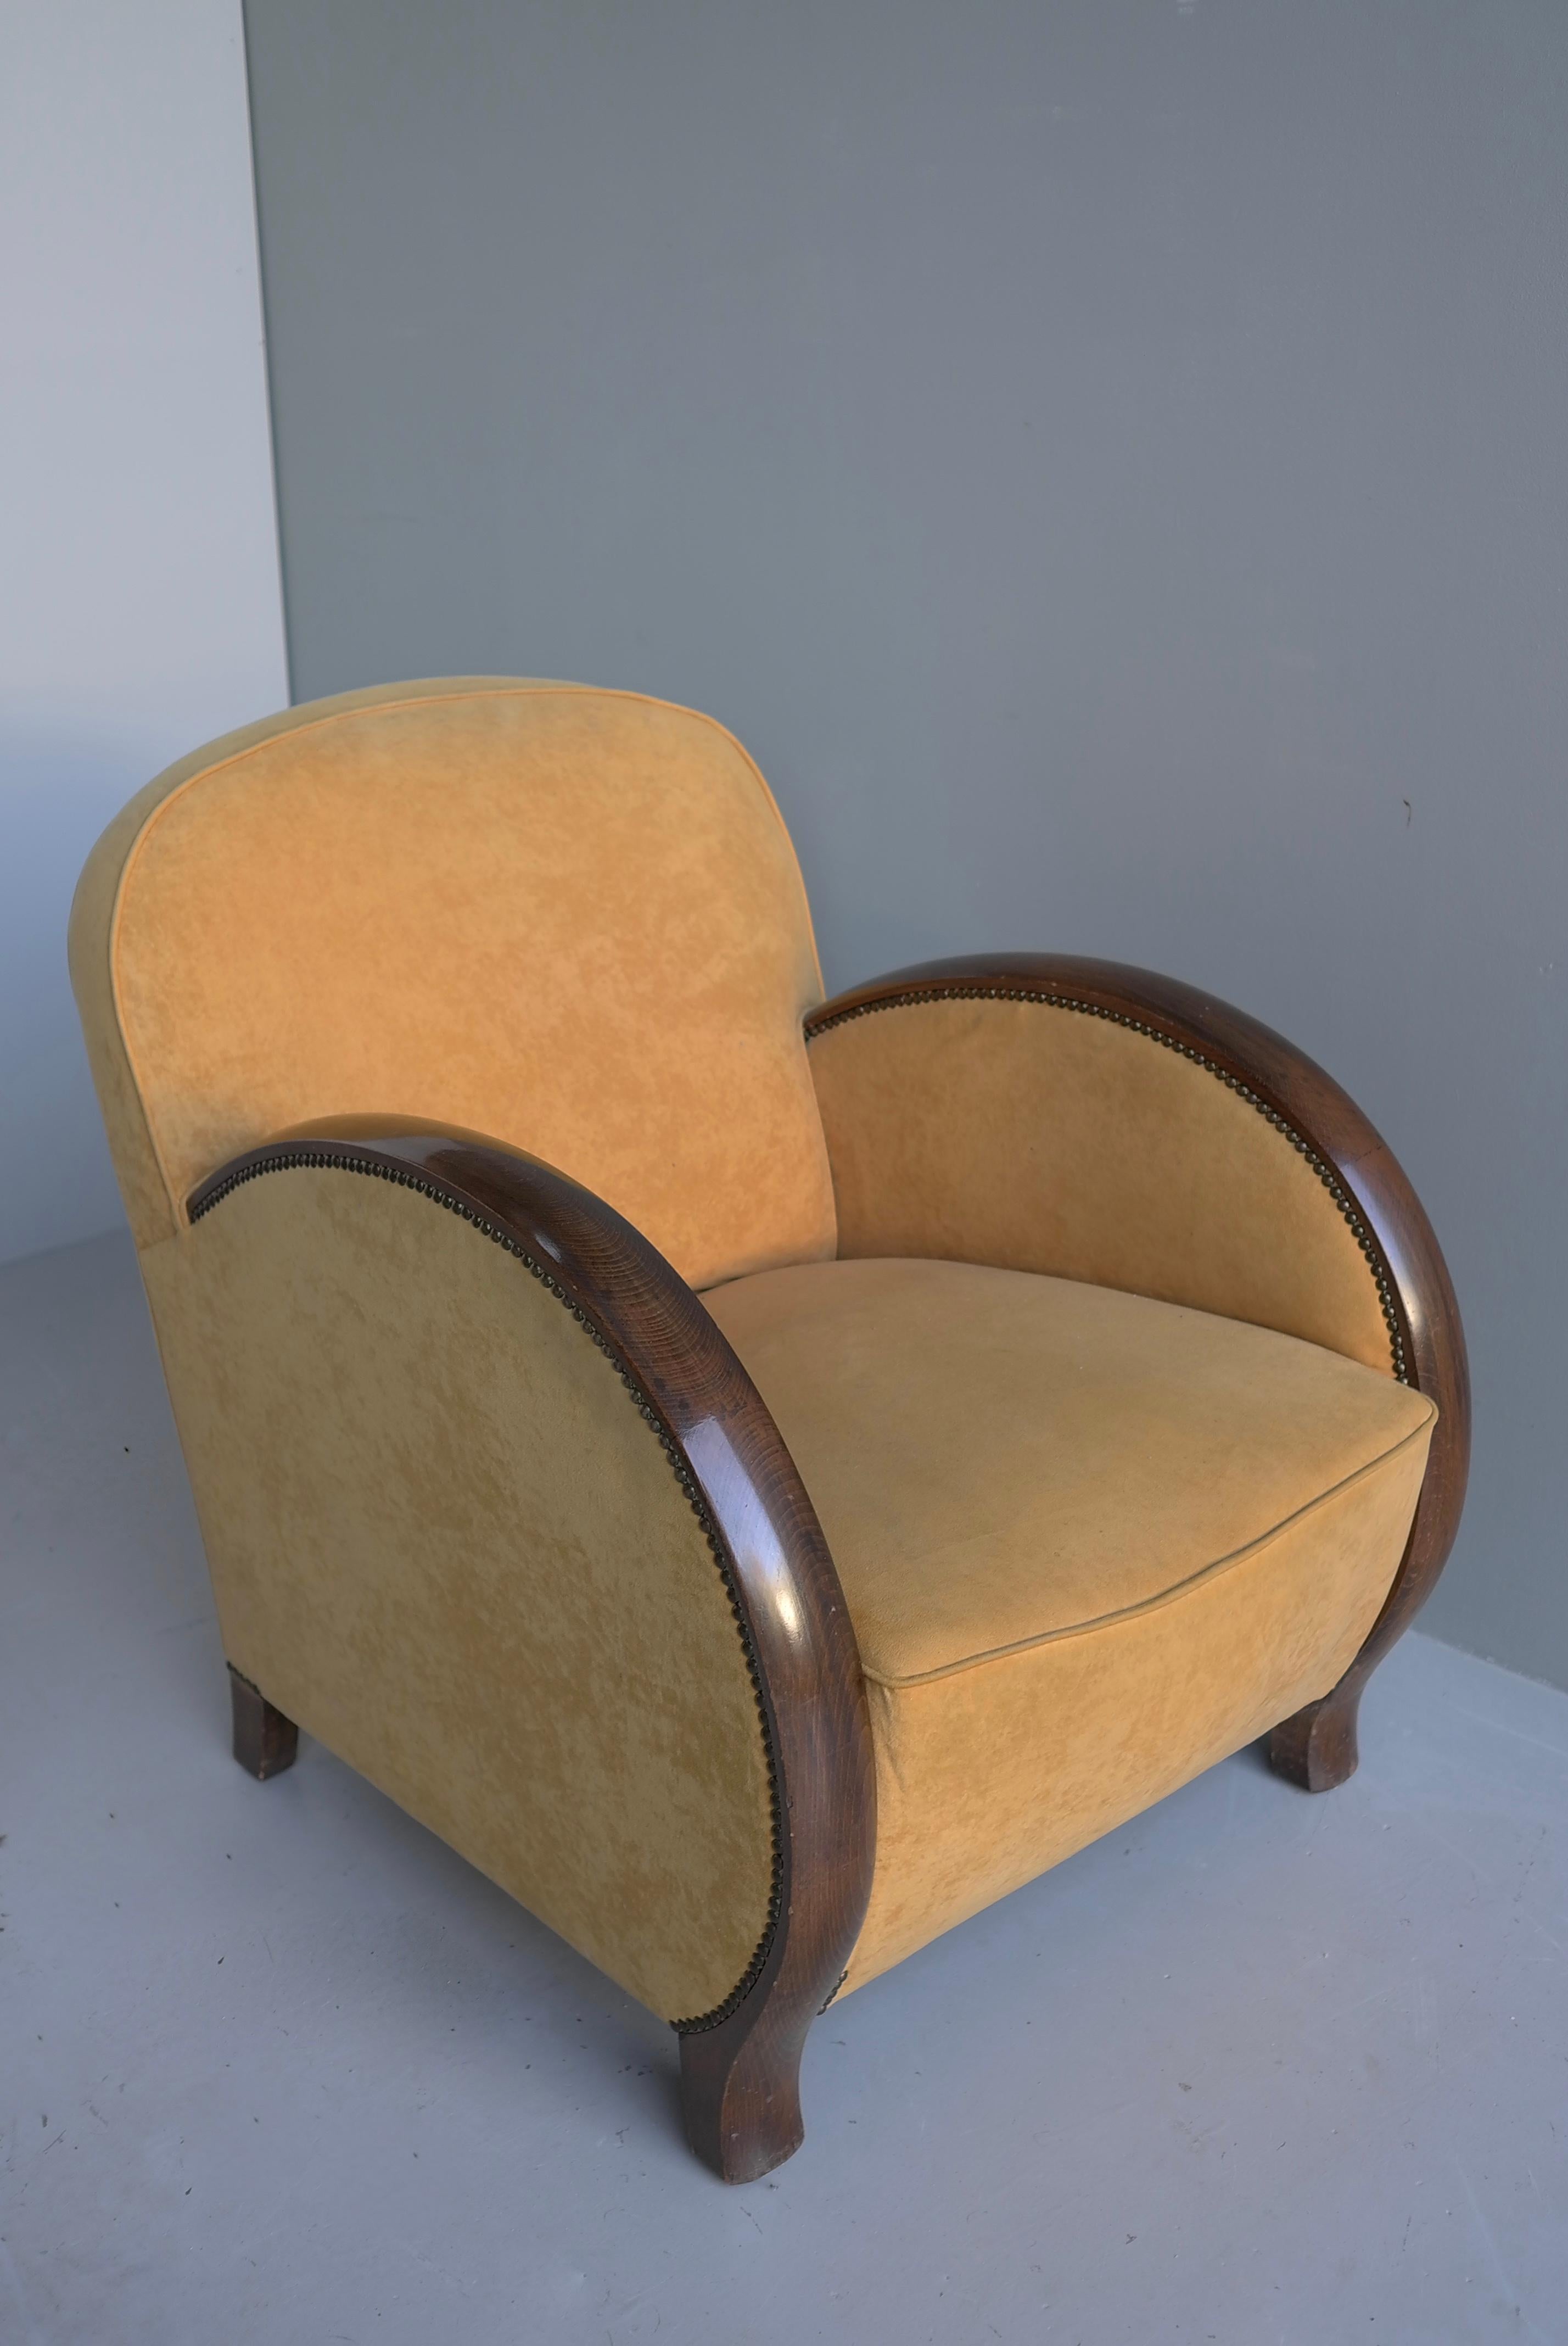 Pair of Art Deco Streamlined Armchairs in yellow Velvet with Wooden arms 1930's For Sale 10